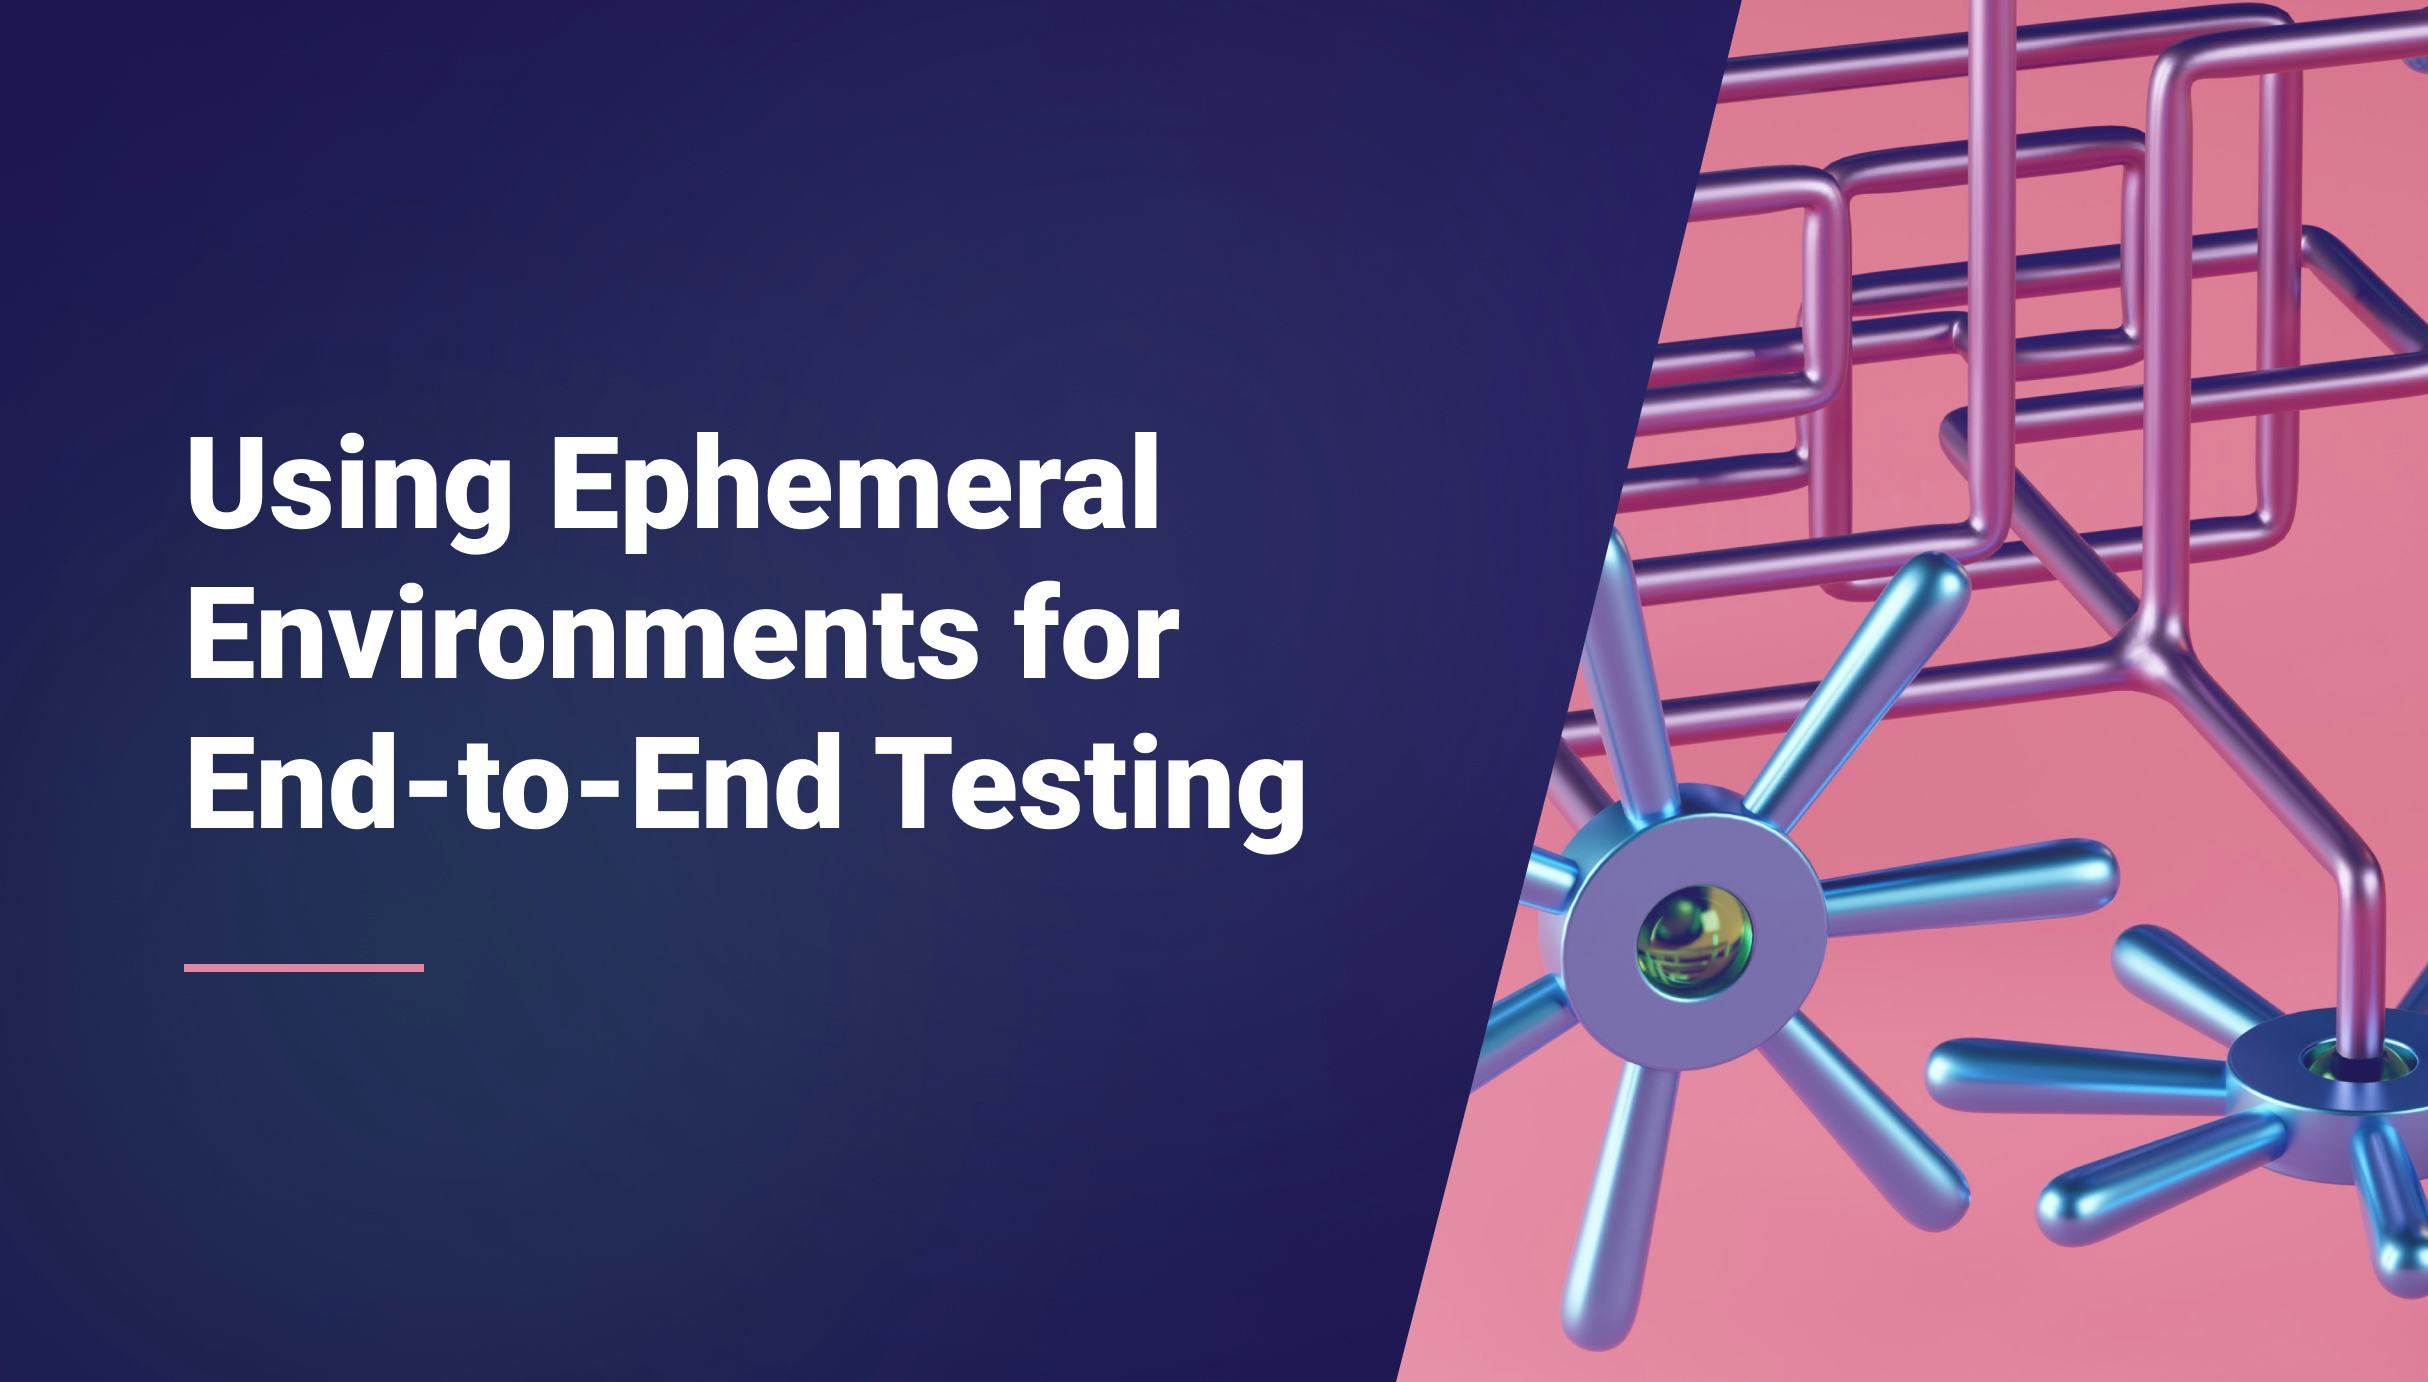 How to Use Ephemeral Environments for End-to-End Testing - Qovery